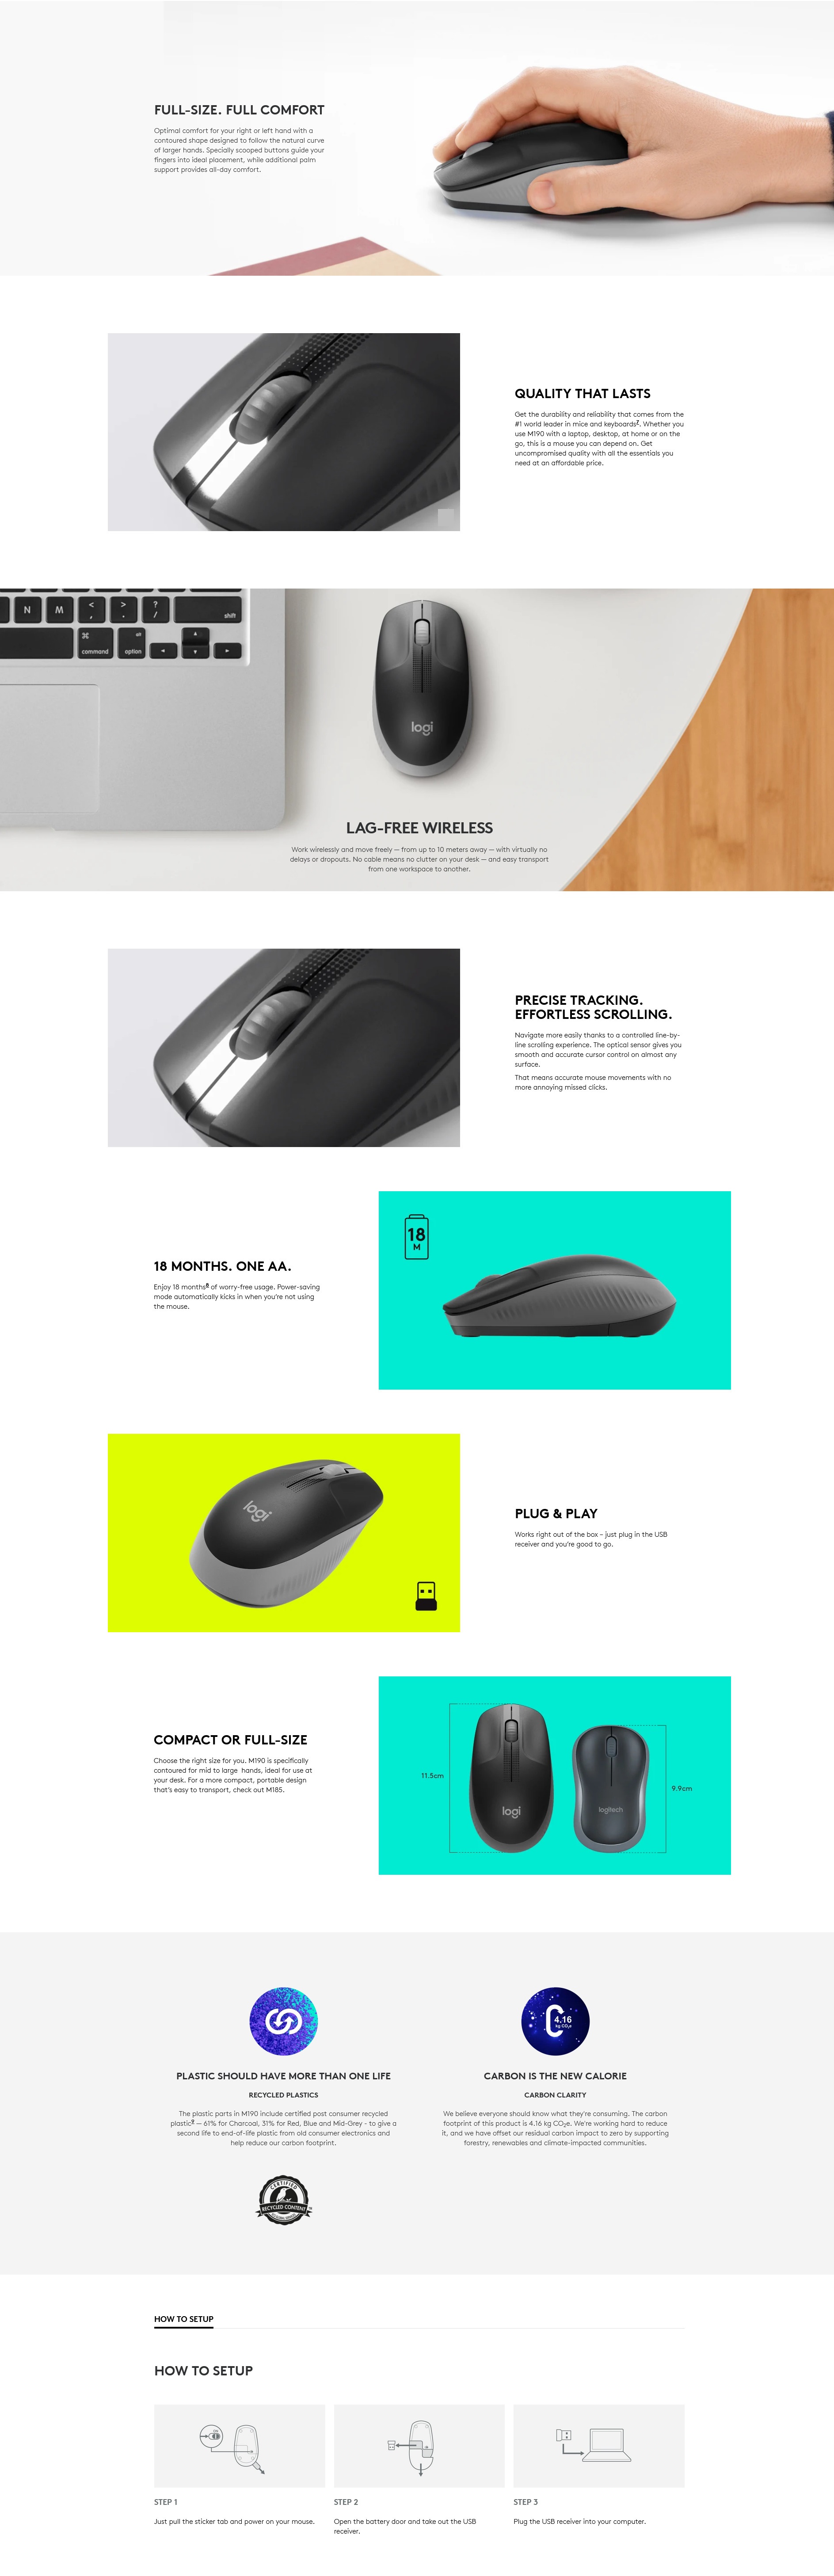 A large marketing image providing additional information about the product Logitech M190 Wireless Mouse - Red - Additional alt info not provided